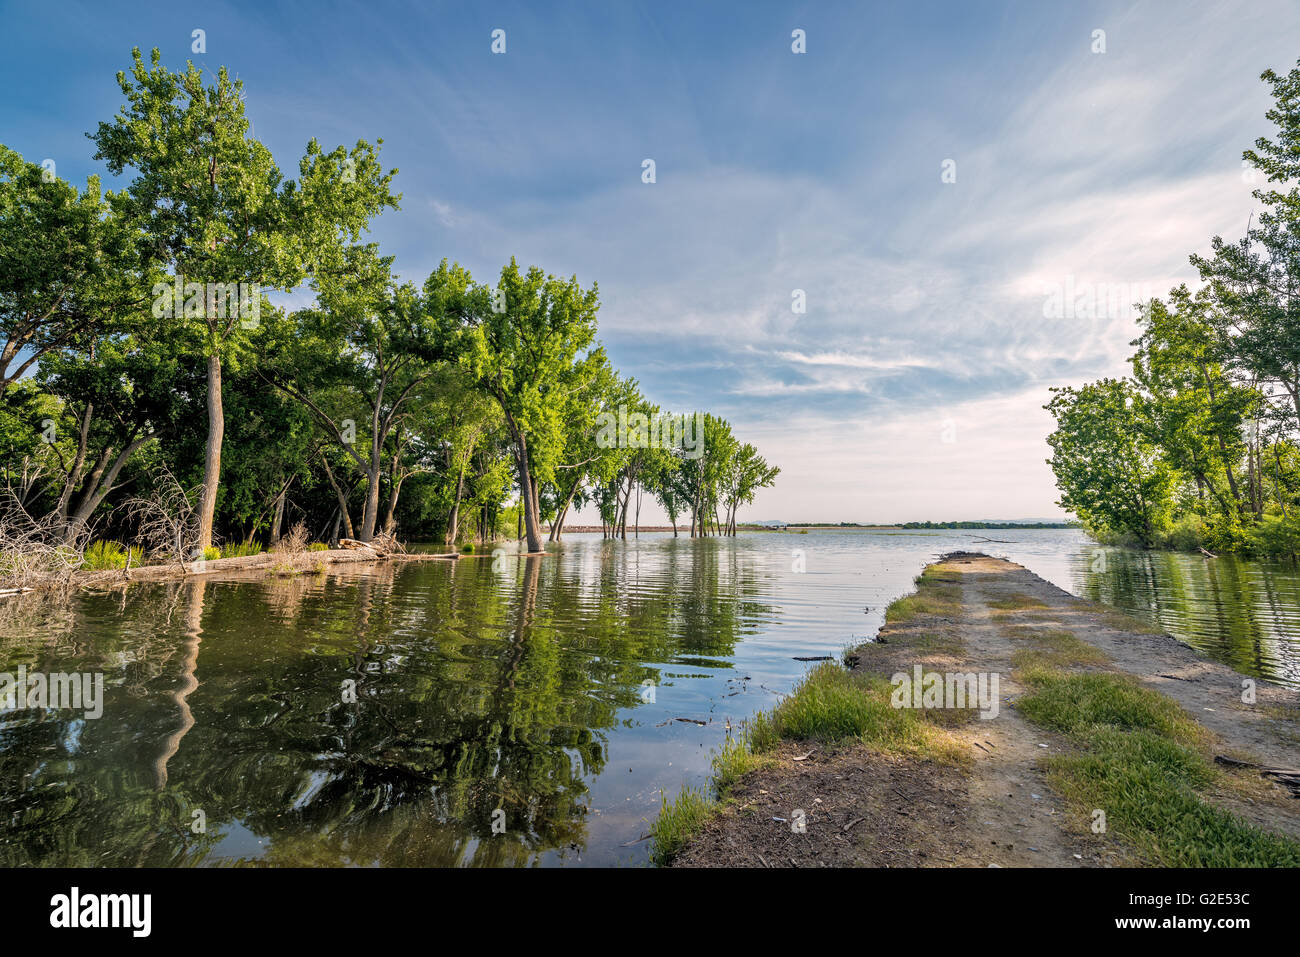 Lake Lowell road to nowhere Stock Photo Alamy